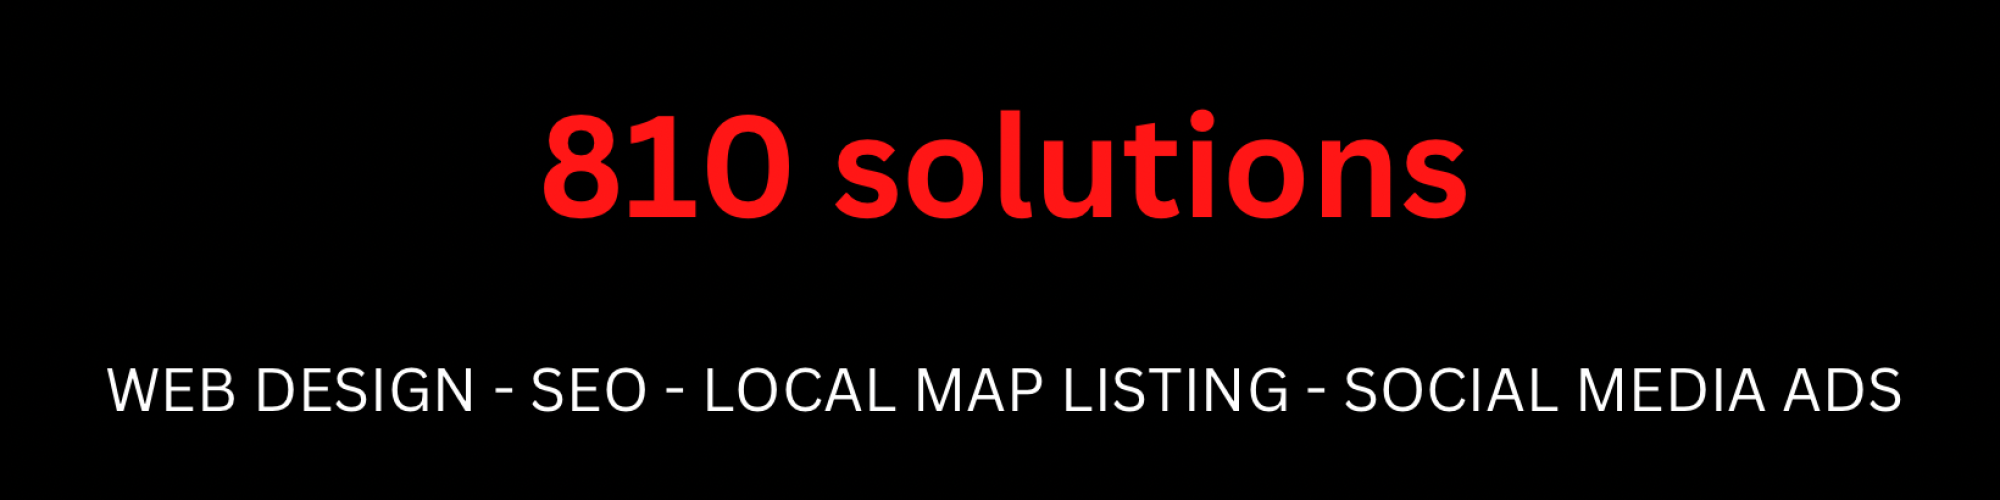 810 solutions